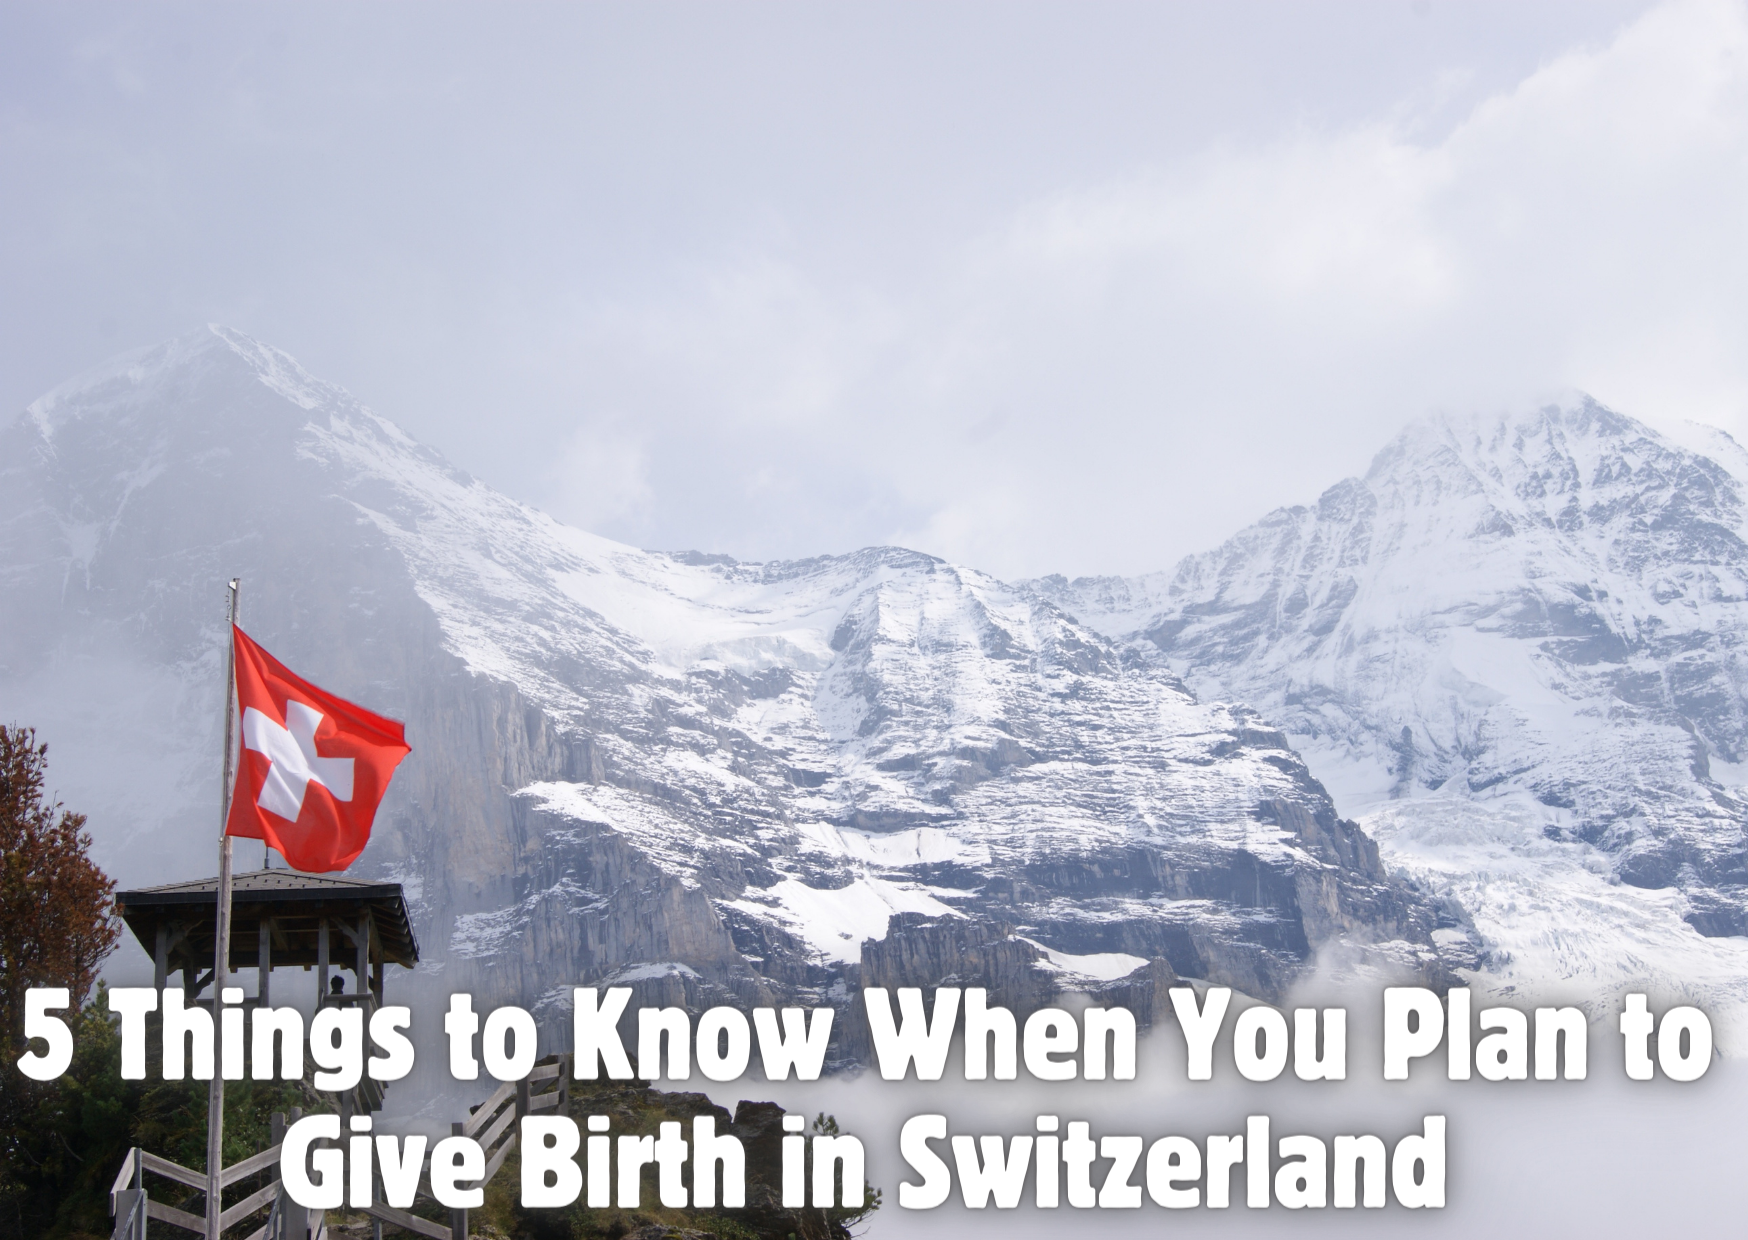 5 Things to Know When You Plan to Give Birth in Switzerland